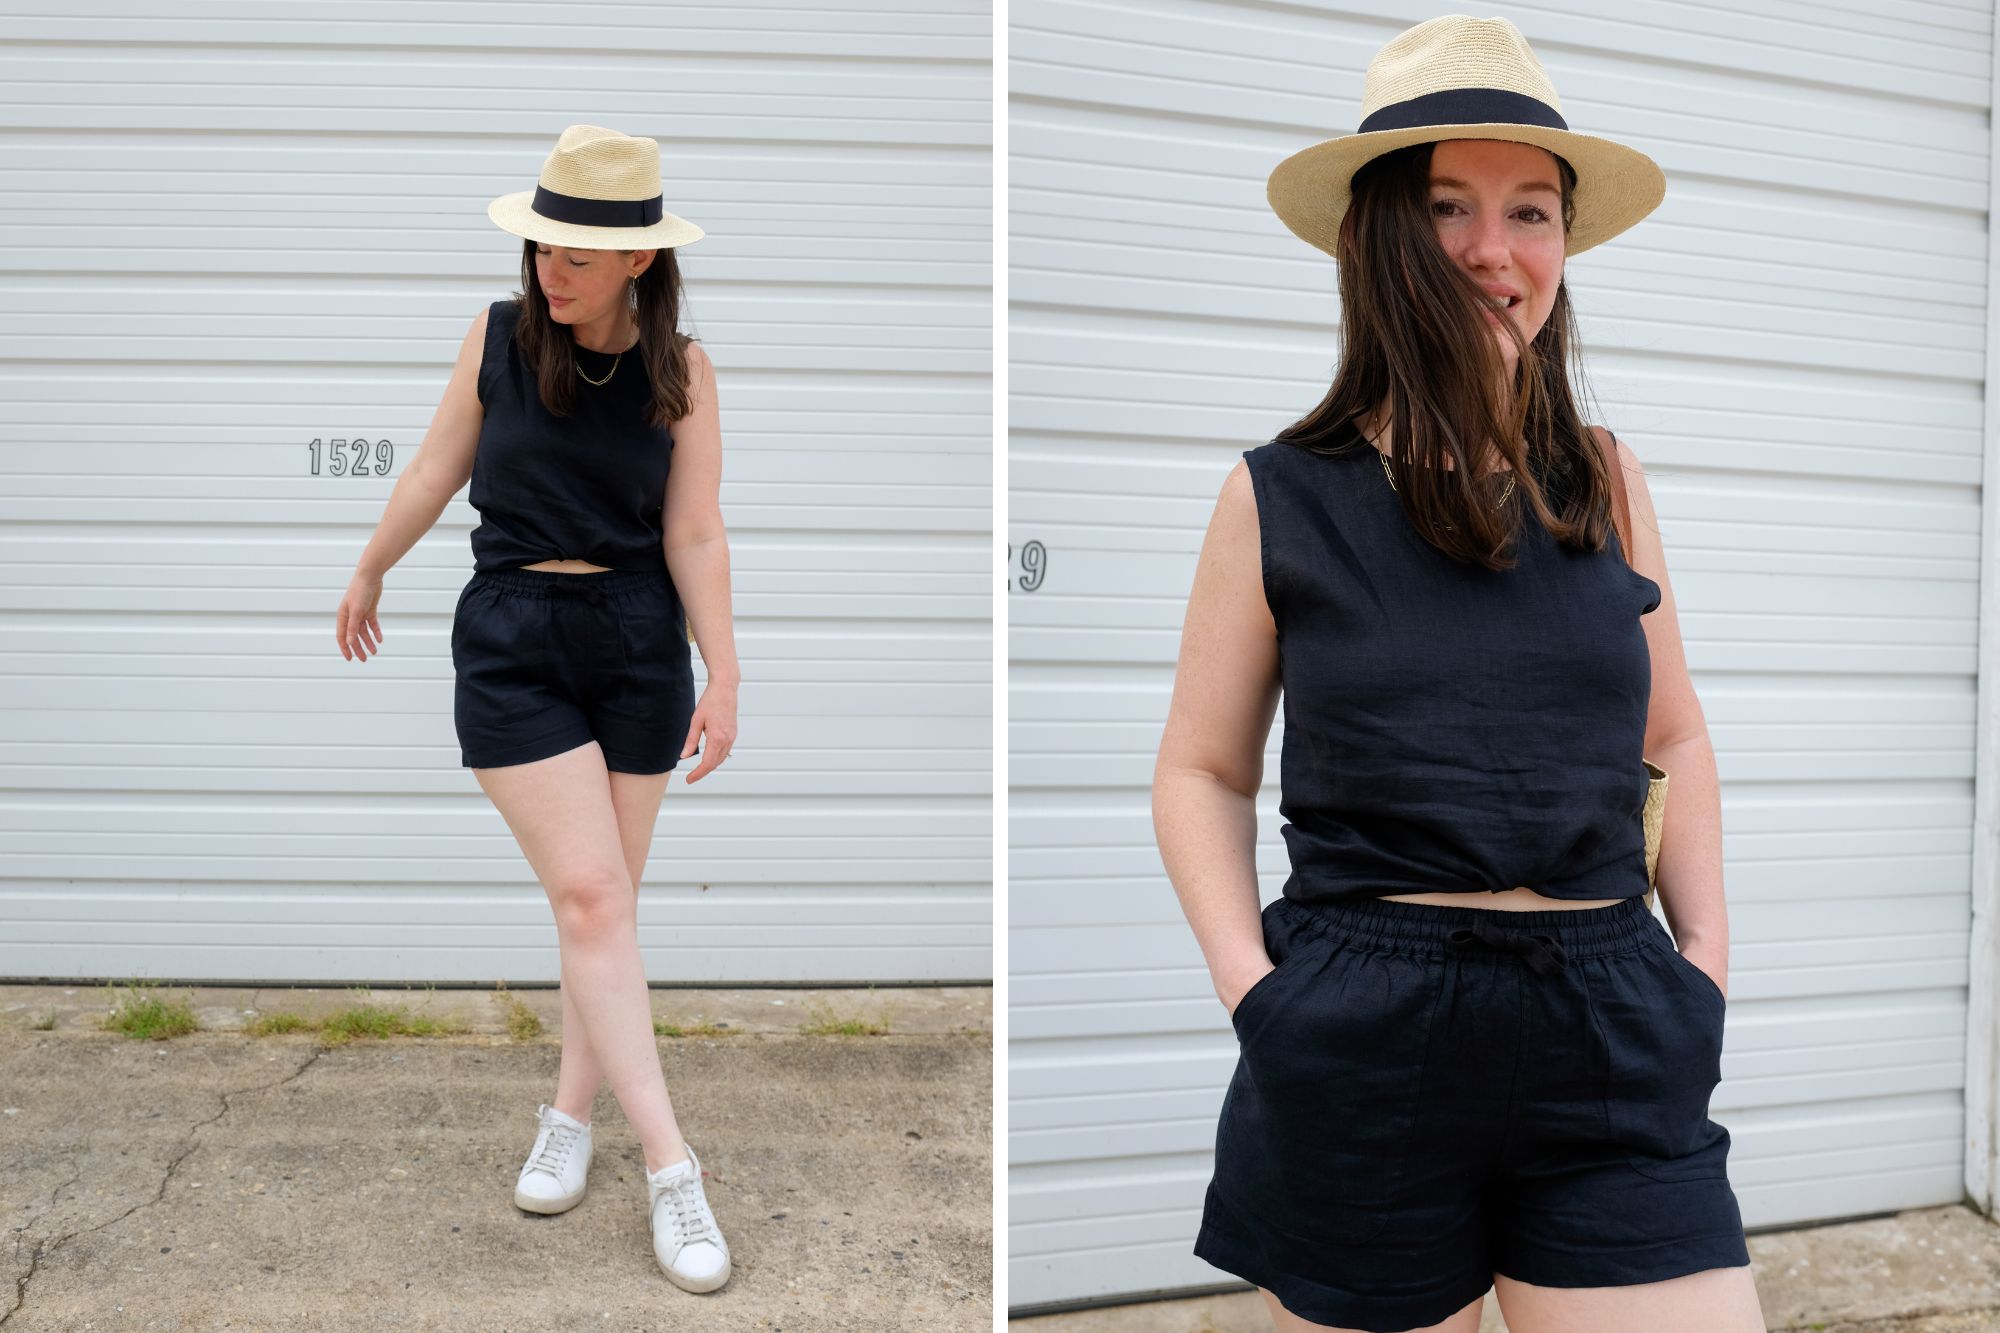 Sets Appeal: A Review of Almost Every Linen Top and Bottom from